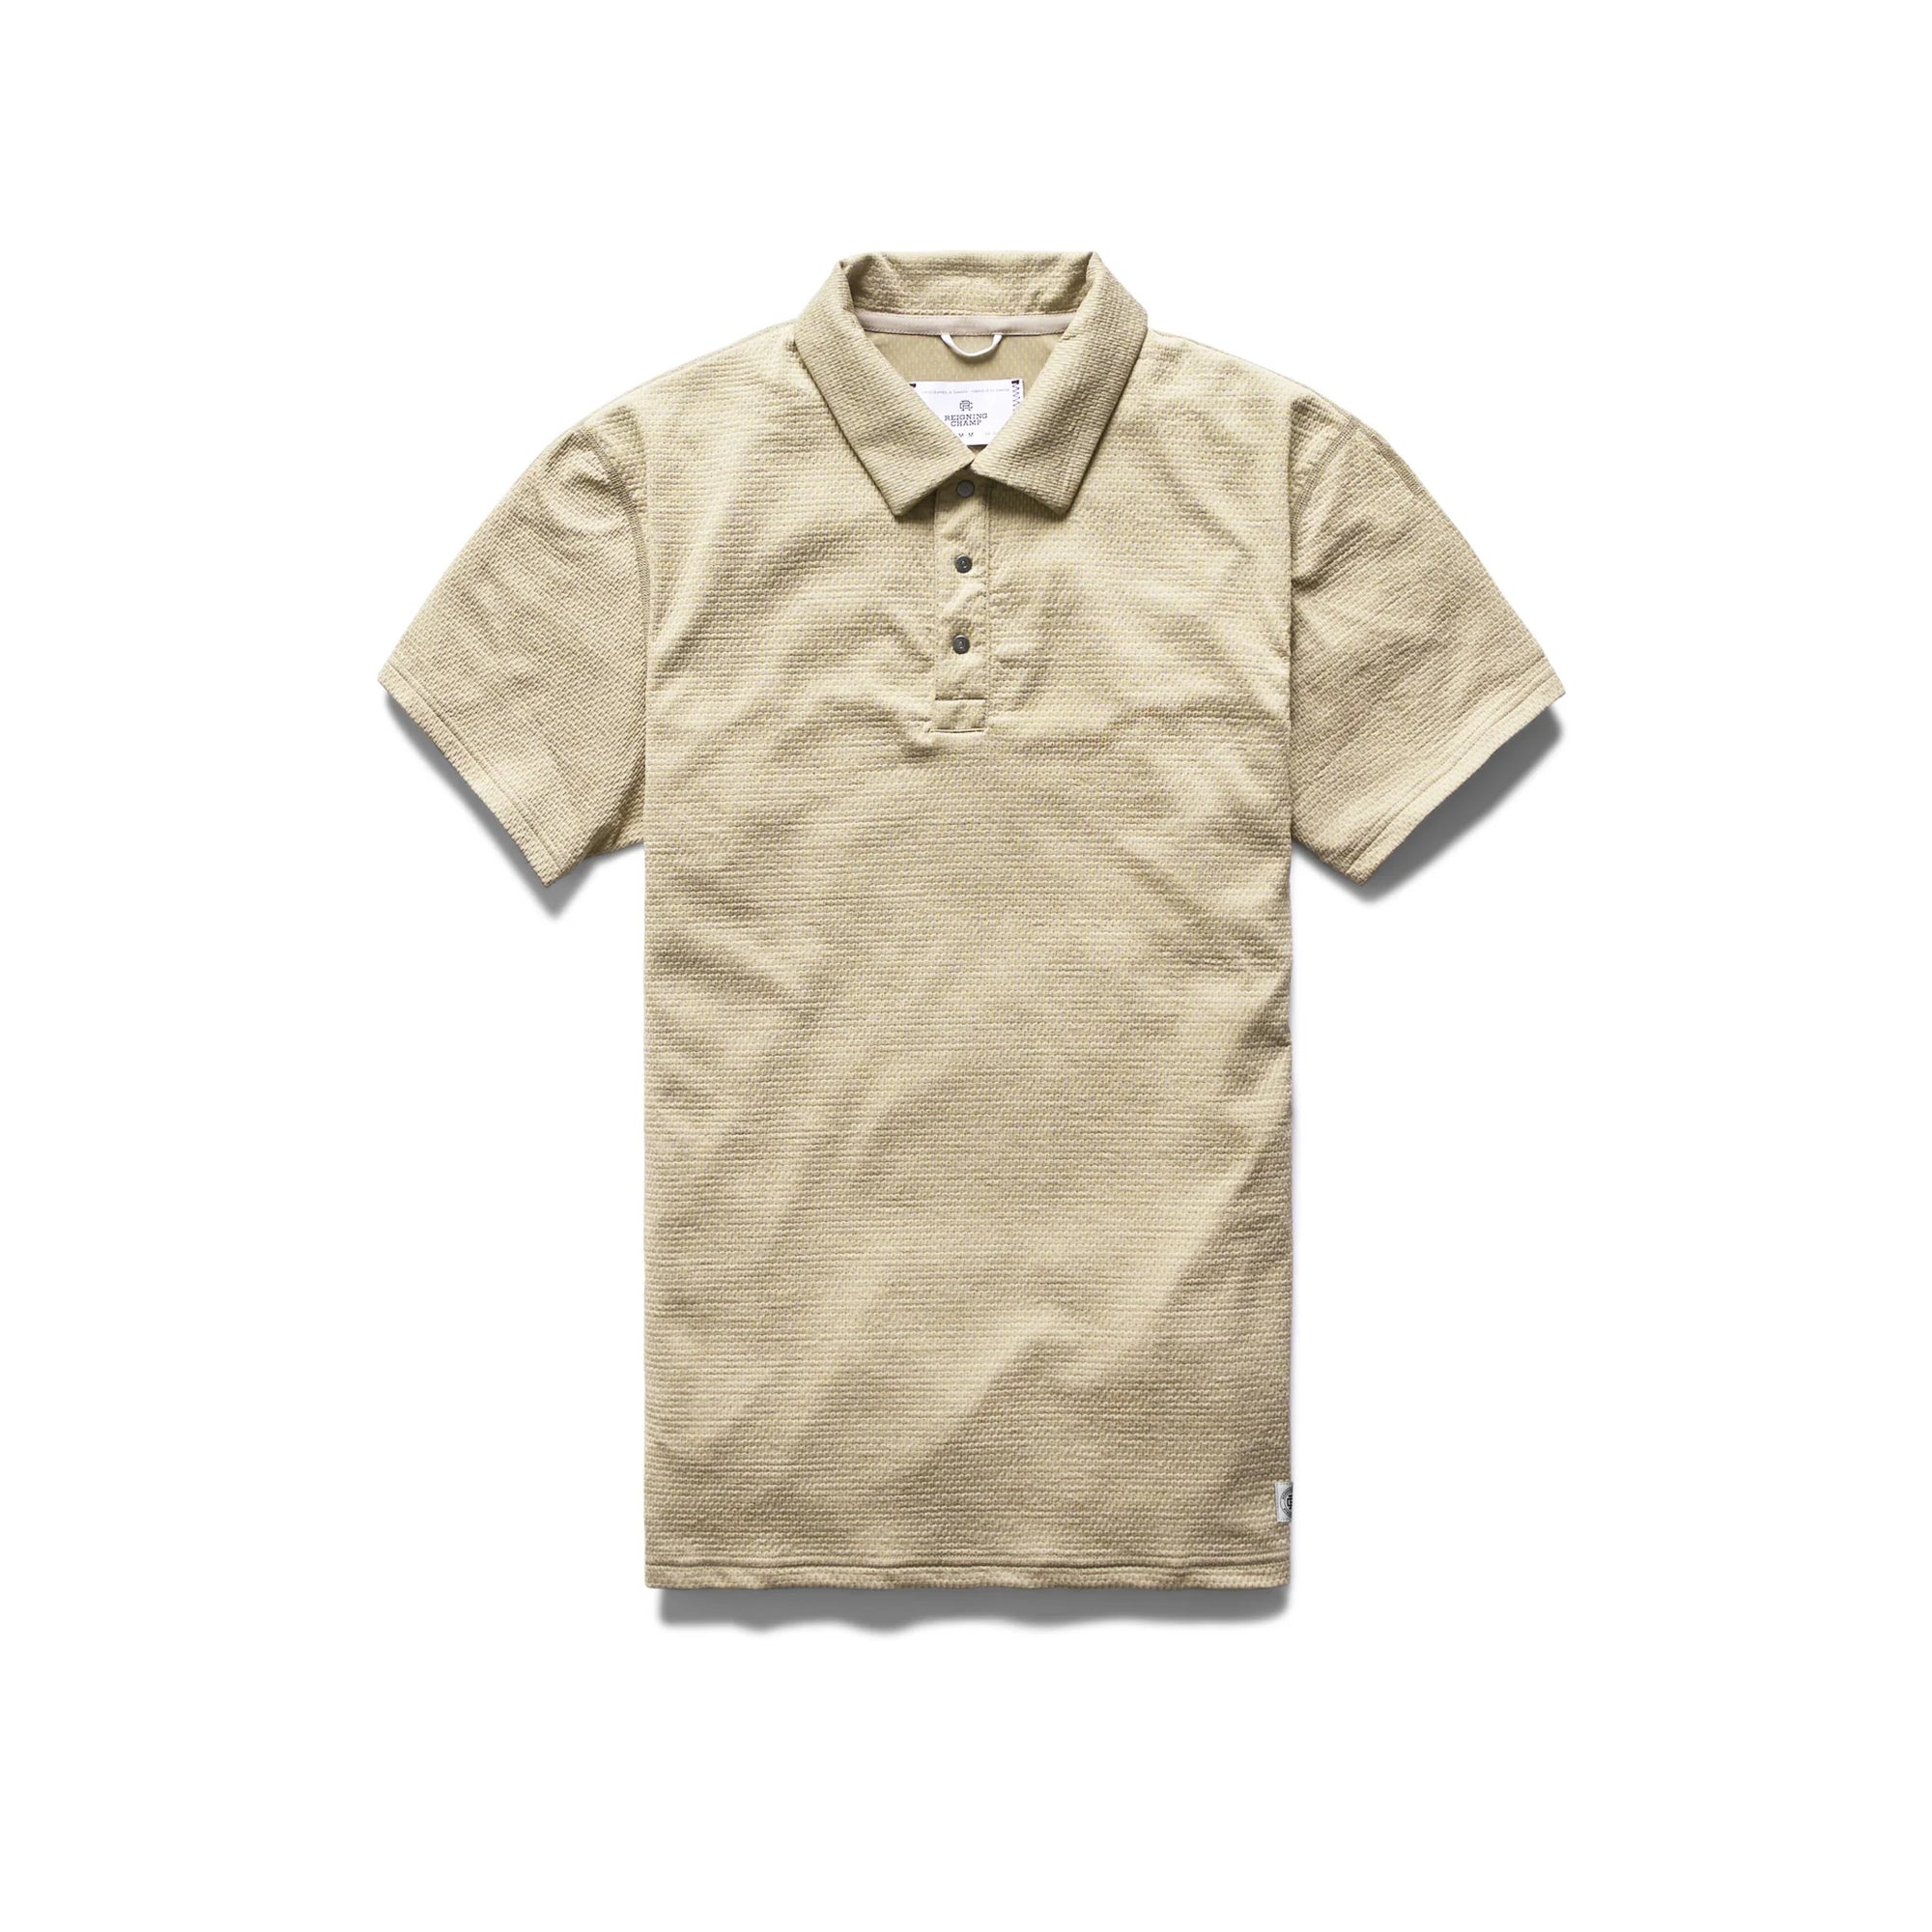 Reigning Champ Solotex Mesh Polo in Dune